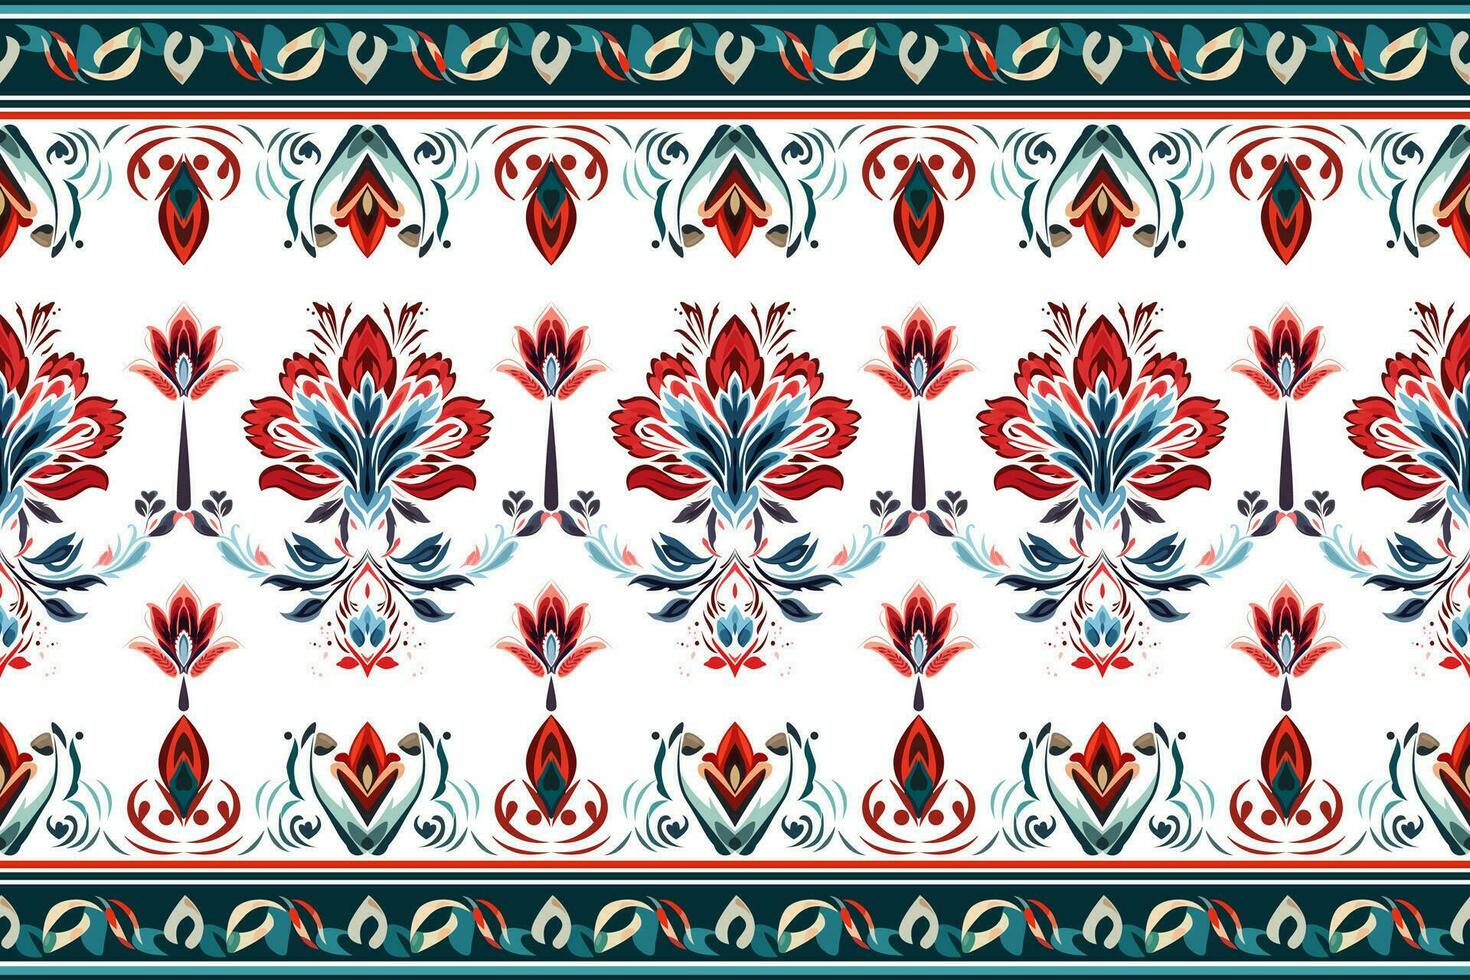 Abstract ethnic border patterns design. Aztec fabric textile mandala decorative. Tribal native motif traditional embroidery vector background